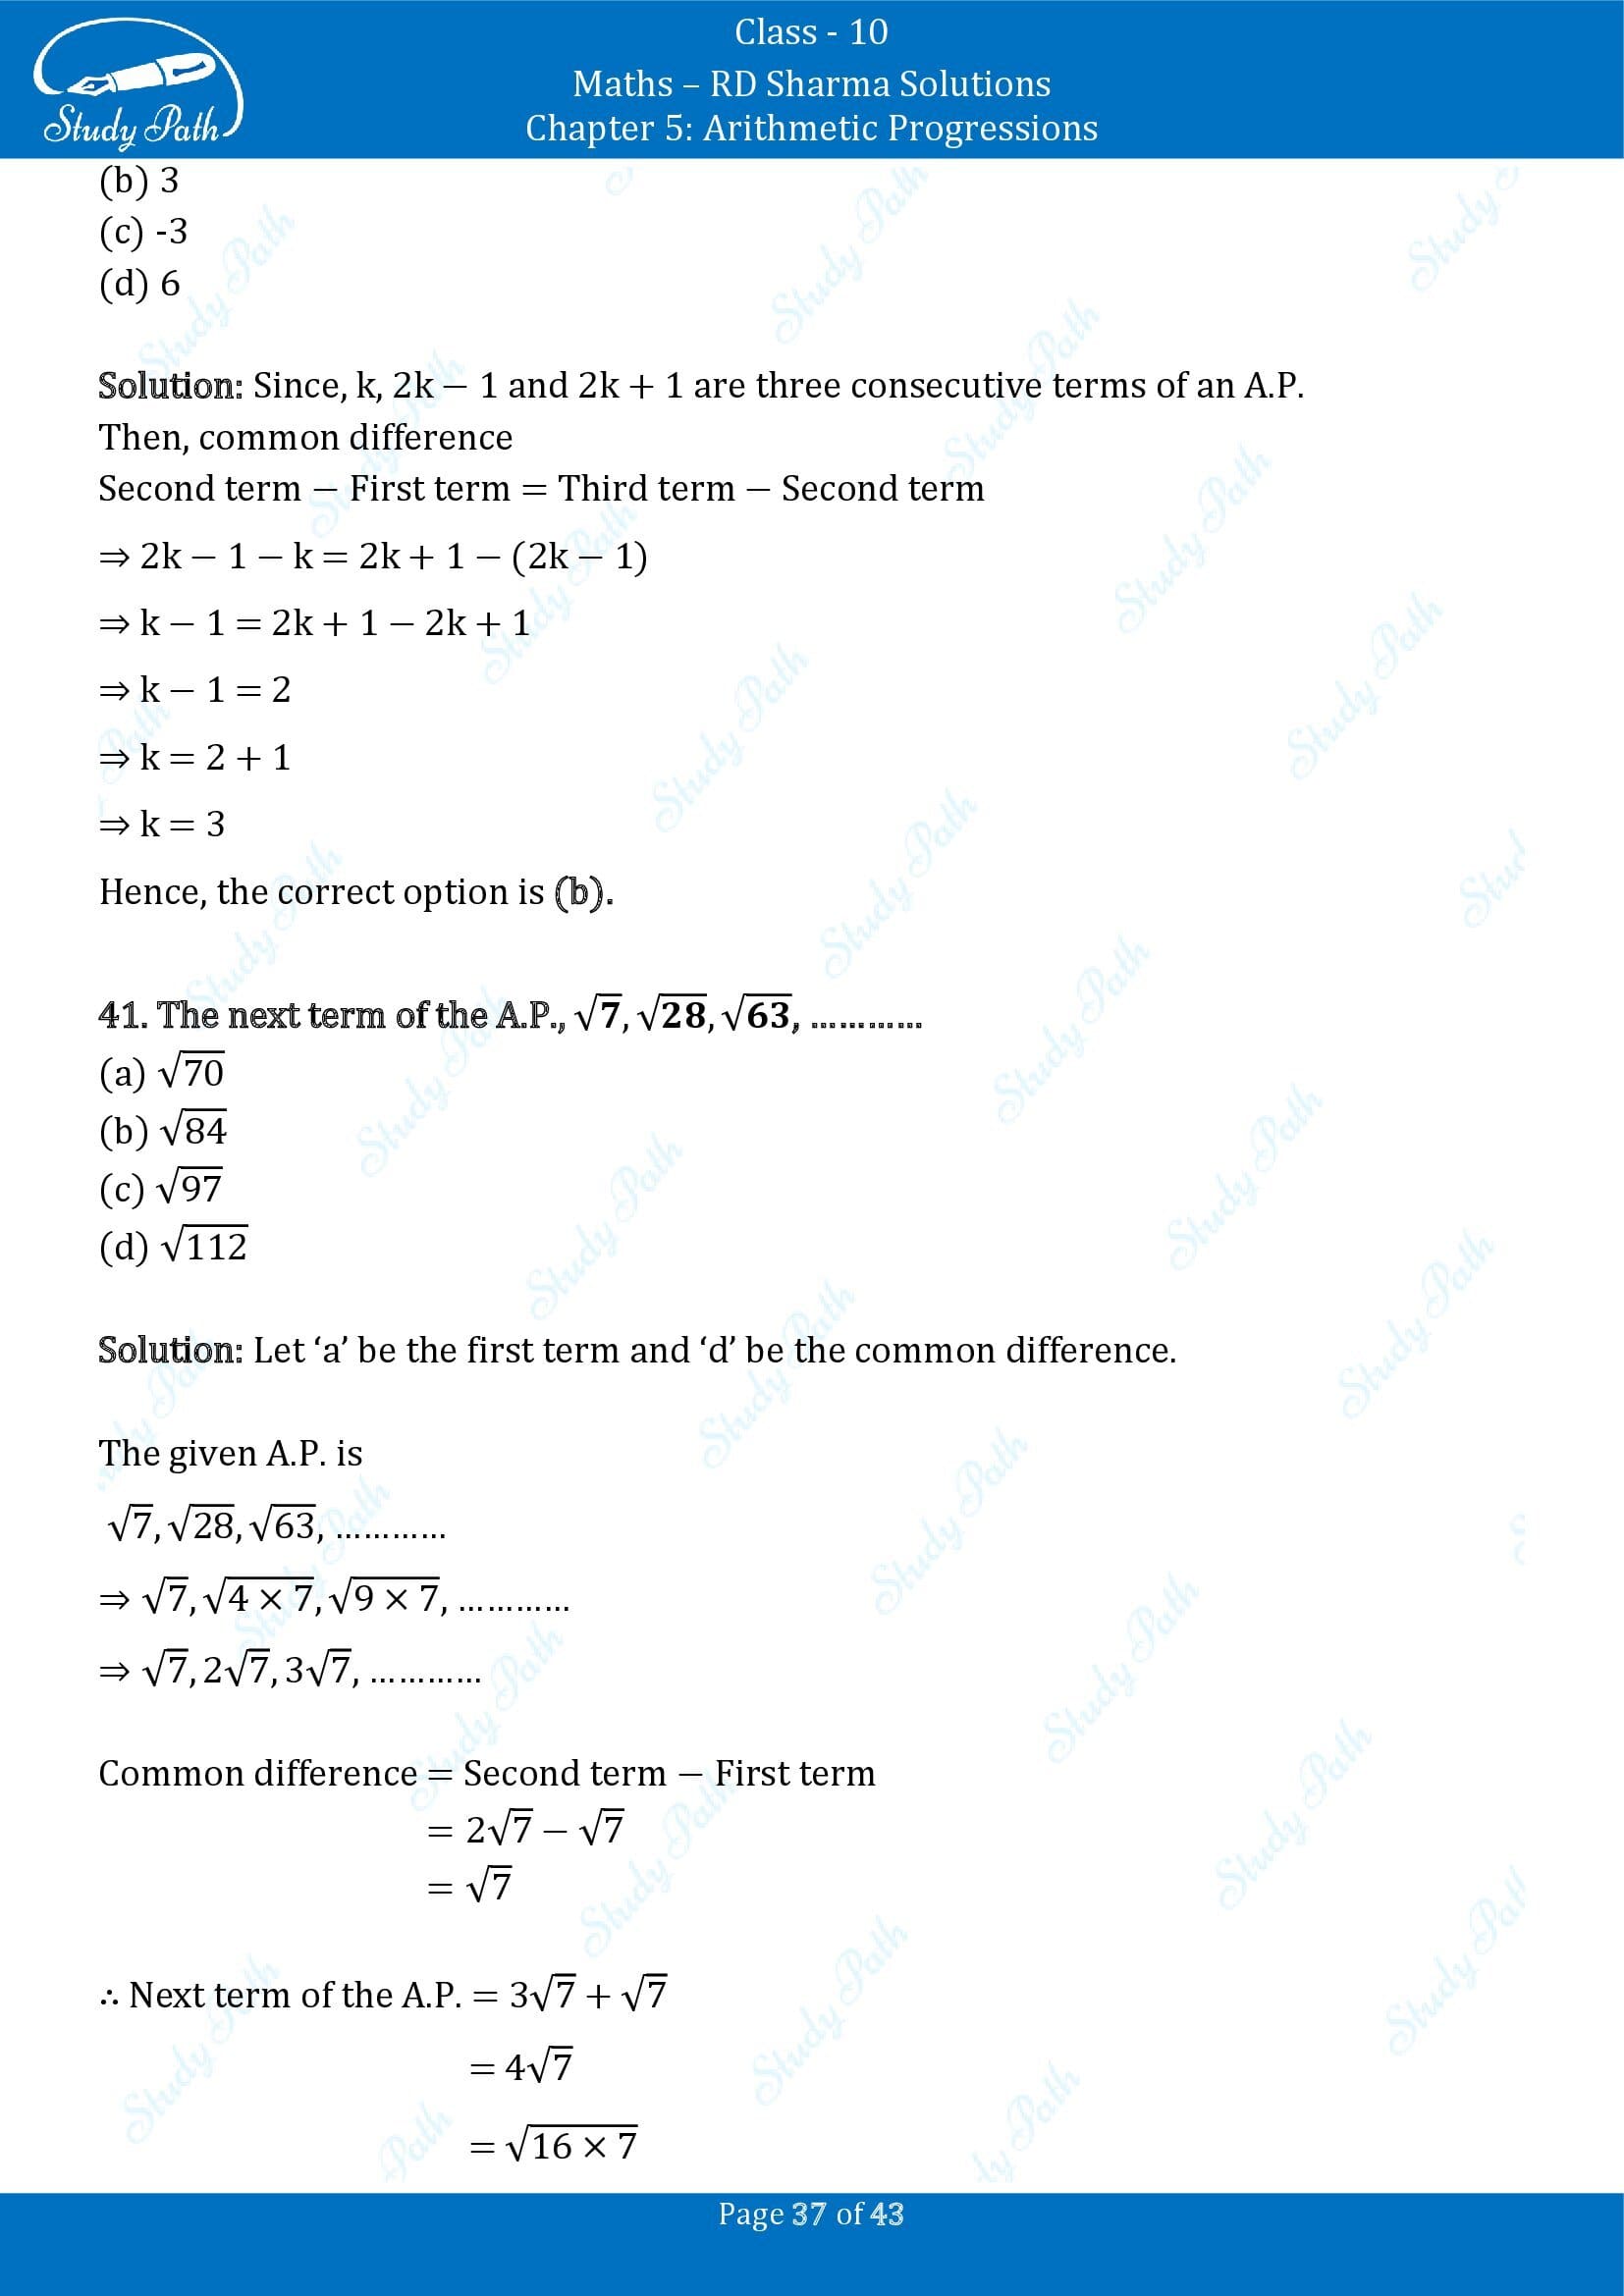 RD Sharma Solutions Class 10 Chapter 5 Arithmetic Progressions Multiple Choice Question MCQs 00037